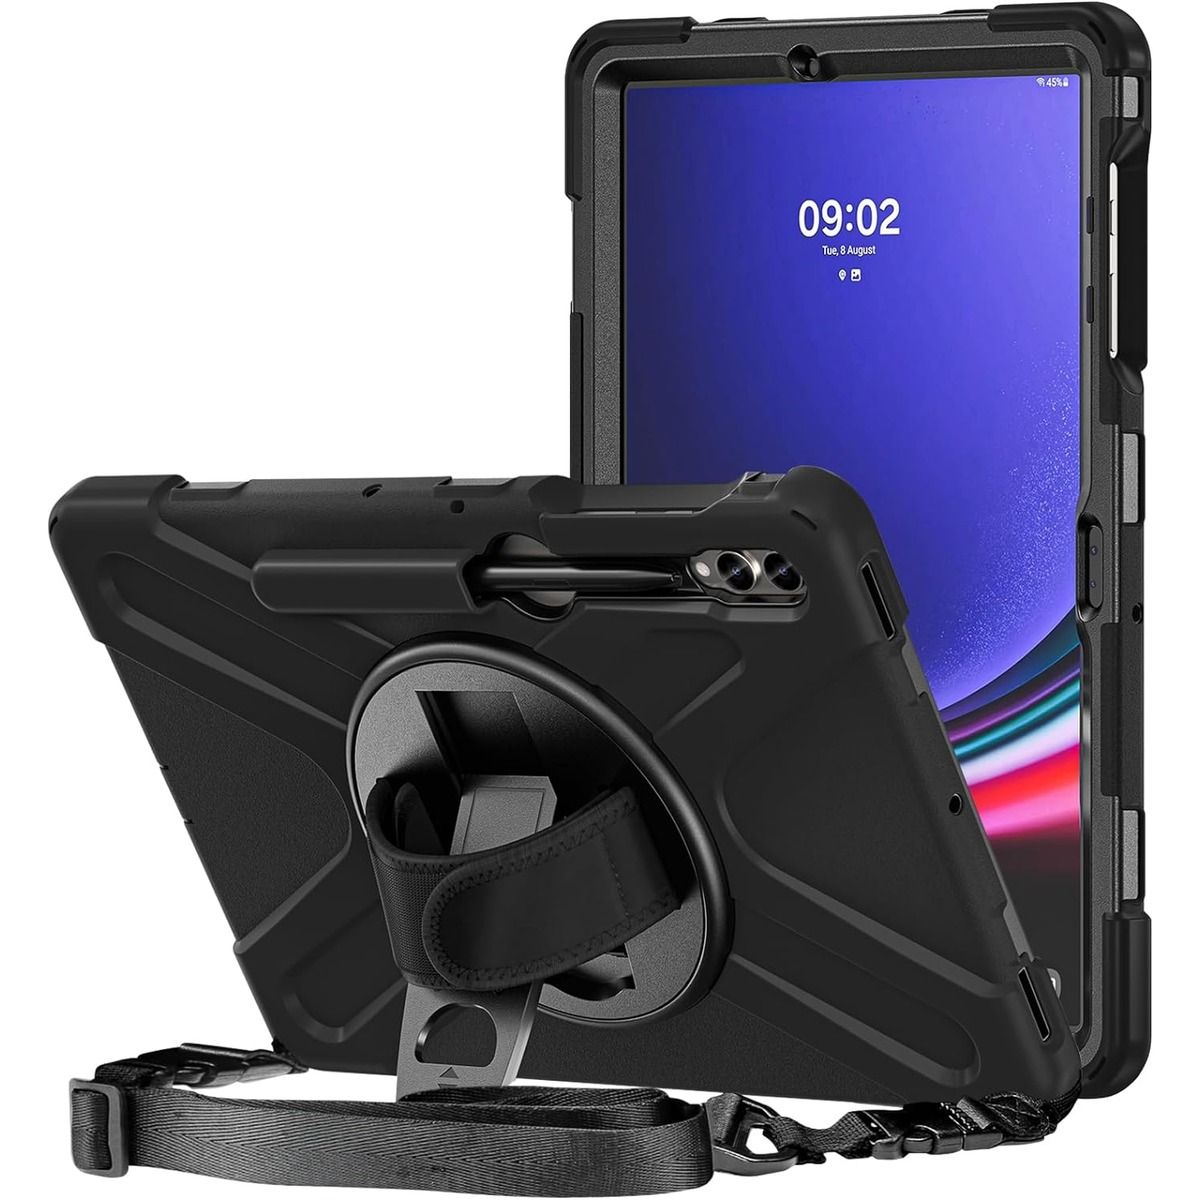 ProCase Rugged Case and alaxy Tab S9 FE+ against a white background